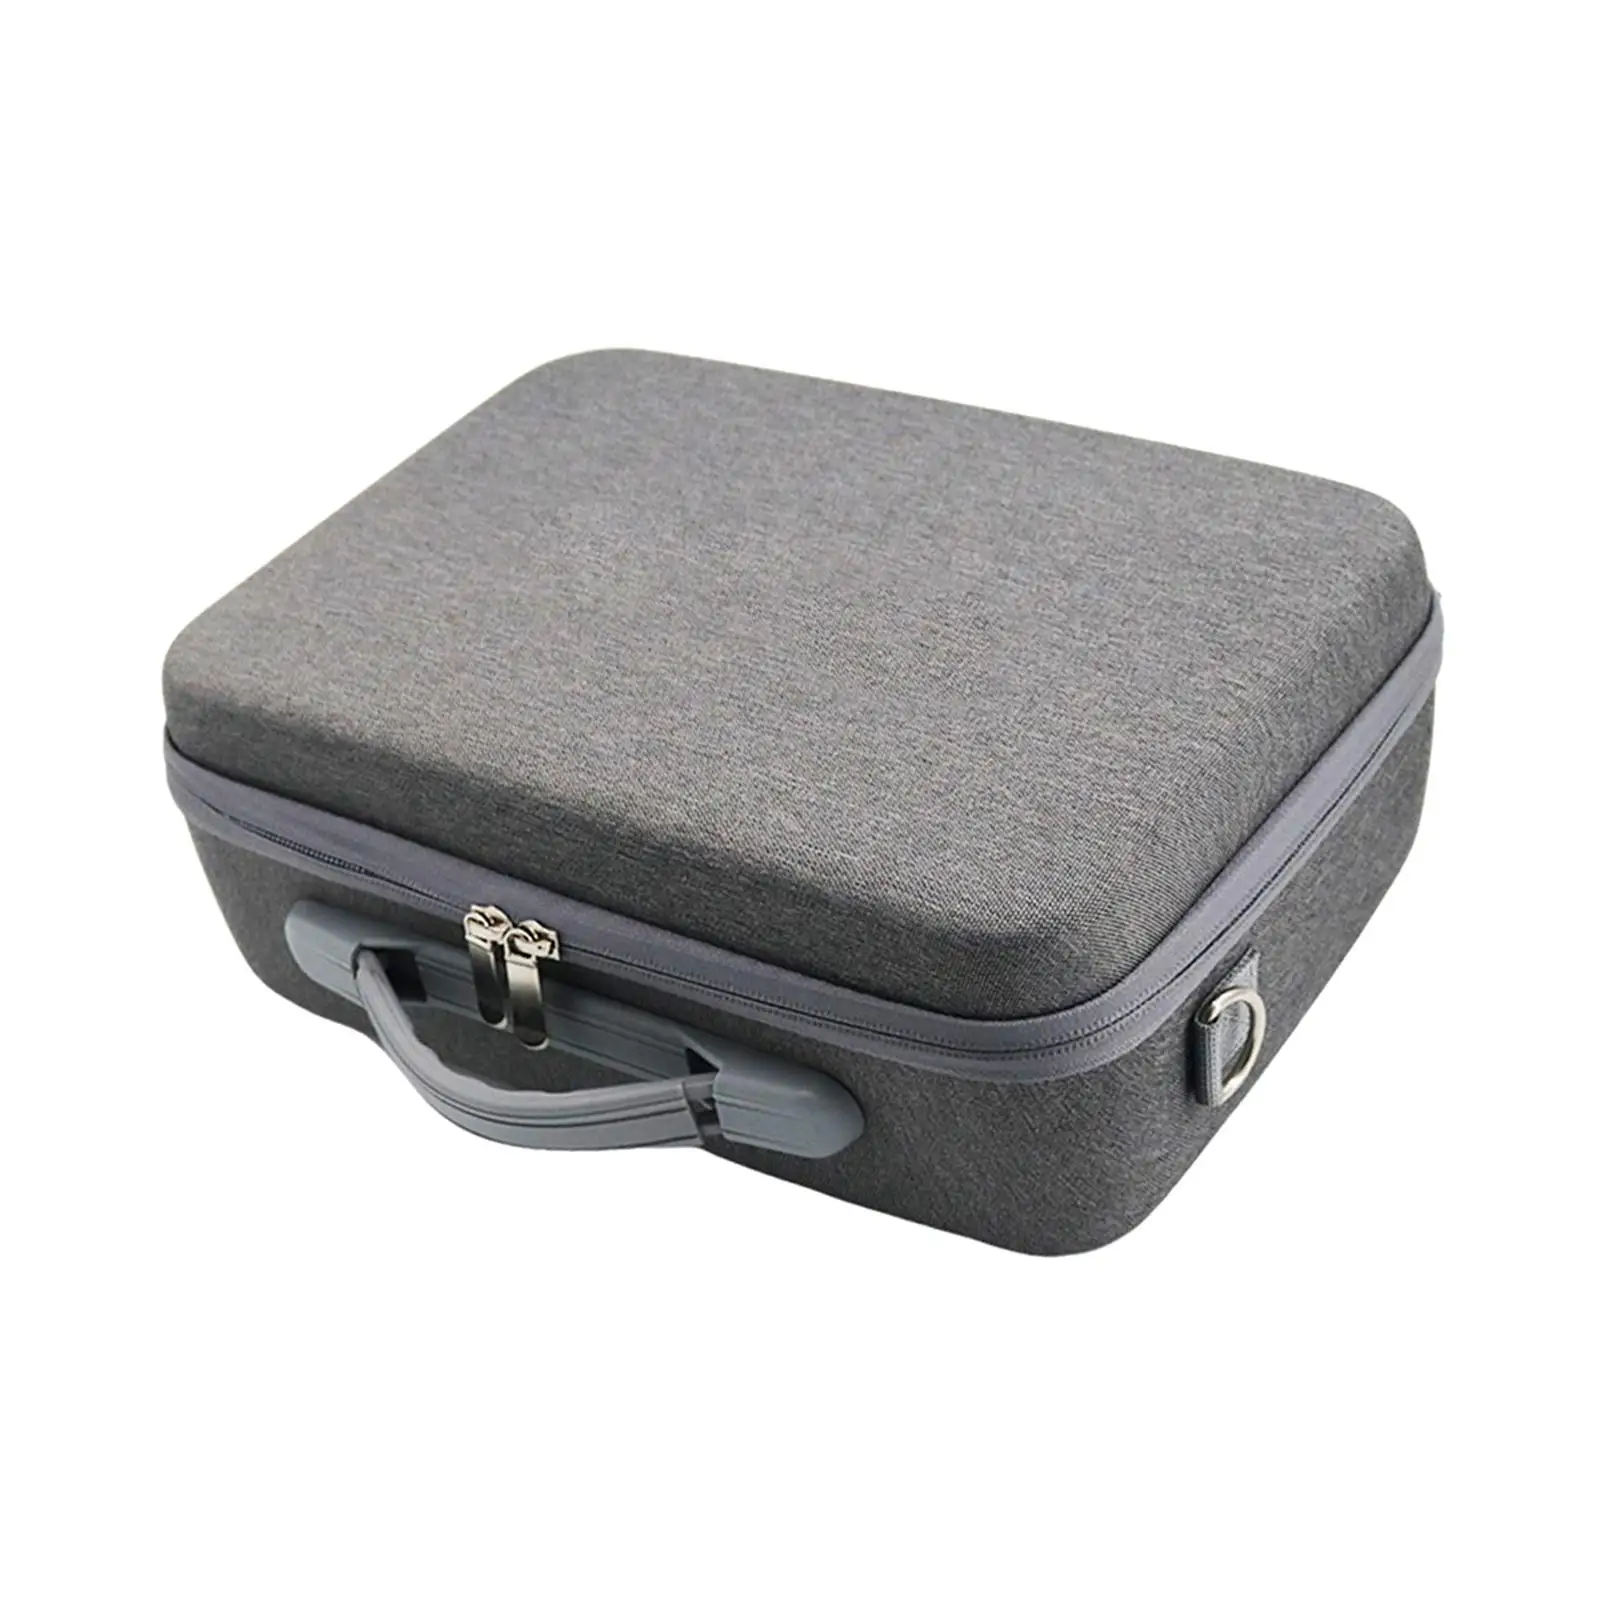 Carrying Case Travel Case with Detachable Shoulder Strap Waterproof Nylon Storage Shoulder Bag for RC Quadcopter Accessories